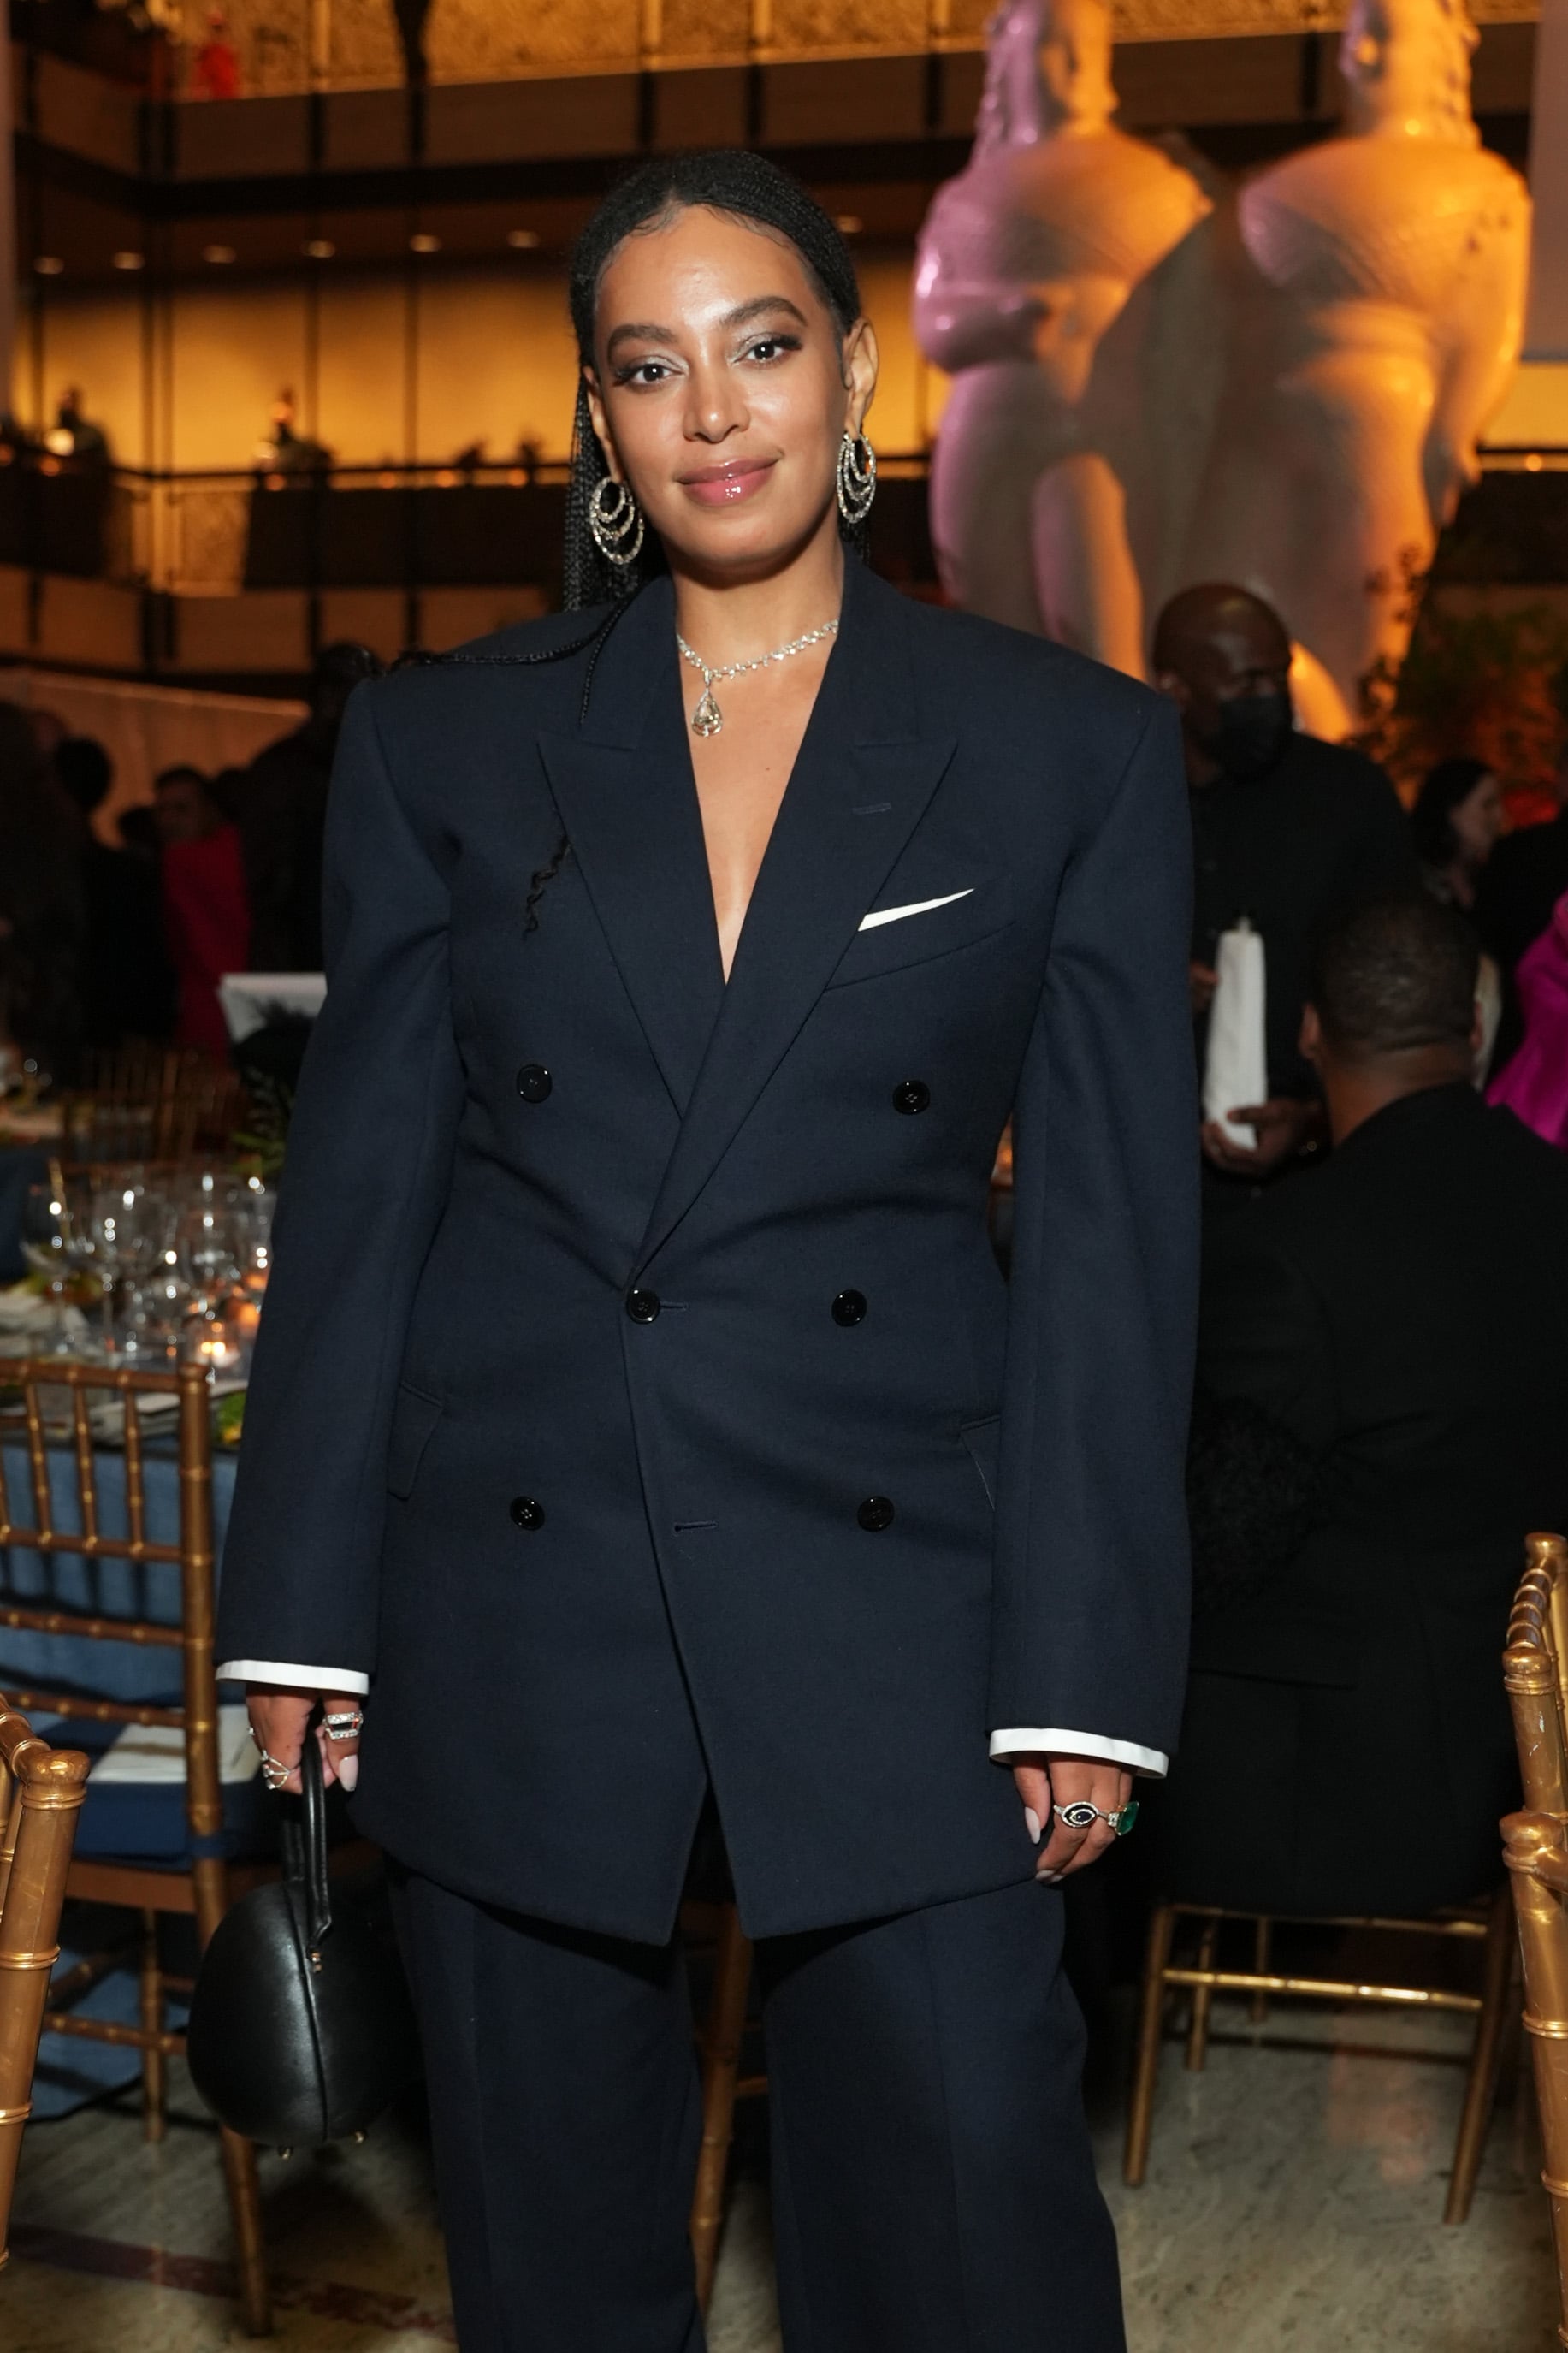 NEW YORK, NEW YORK - SEPTEMBER 28: Solange Knowles attends New York City Ballet's 2022 Fall Fashion Gala at David H. Koch Theater at Lincoln Center on September 28, 2022 in New York City. (Photo by Sean Zanni/Patrick McMullan via Getty Images)